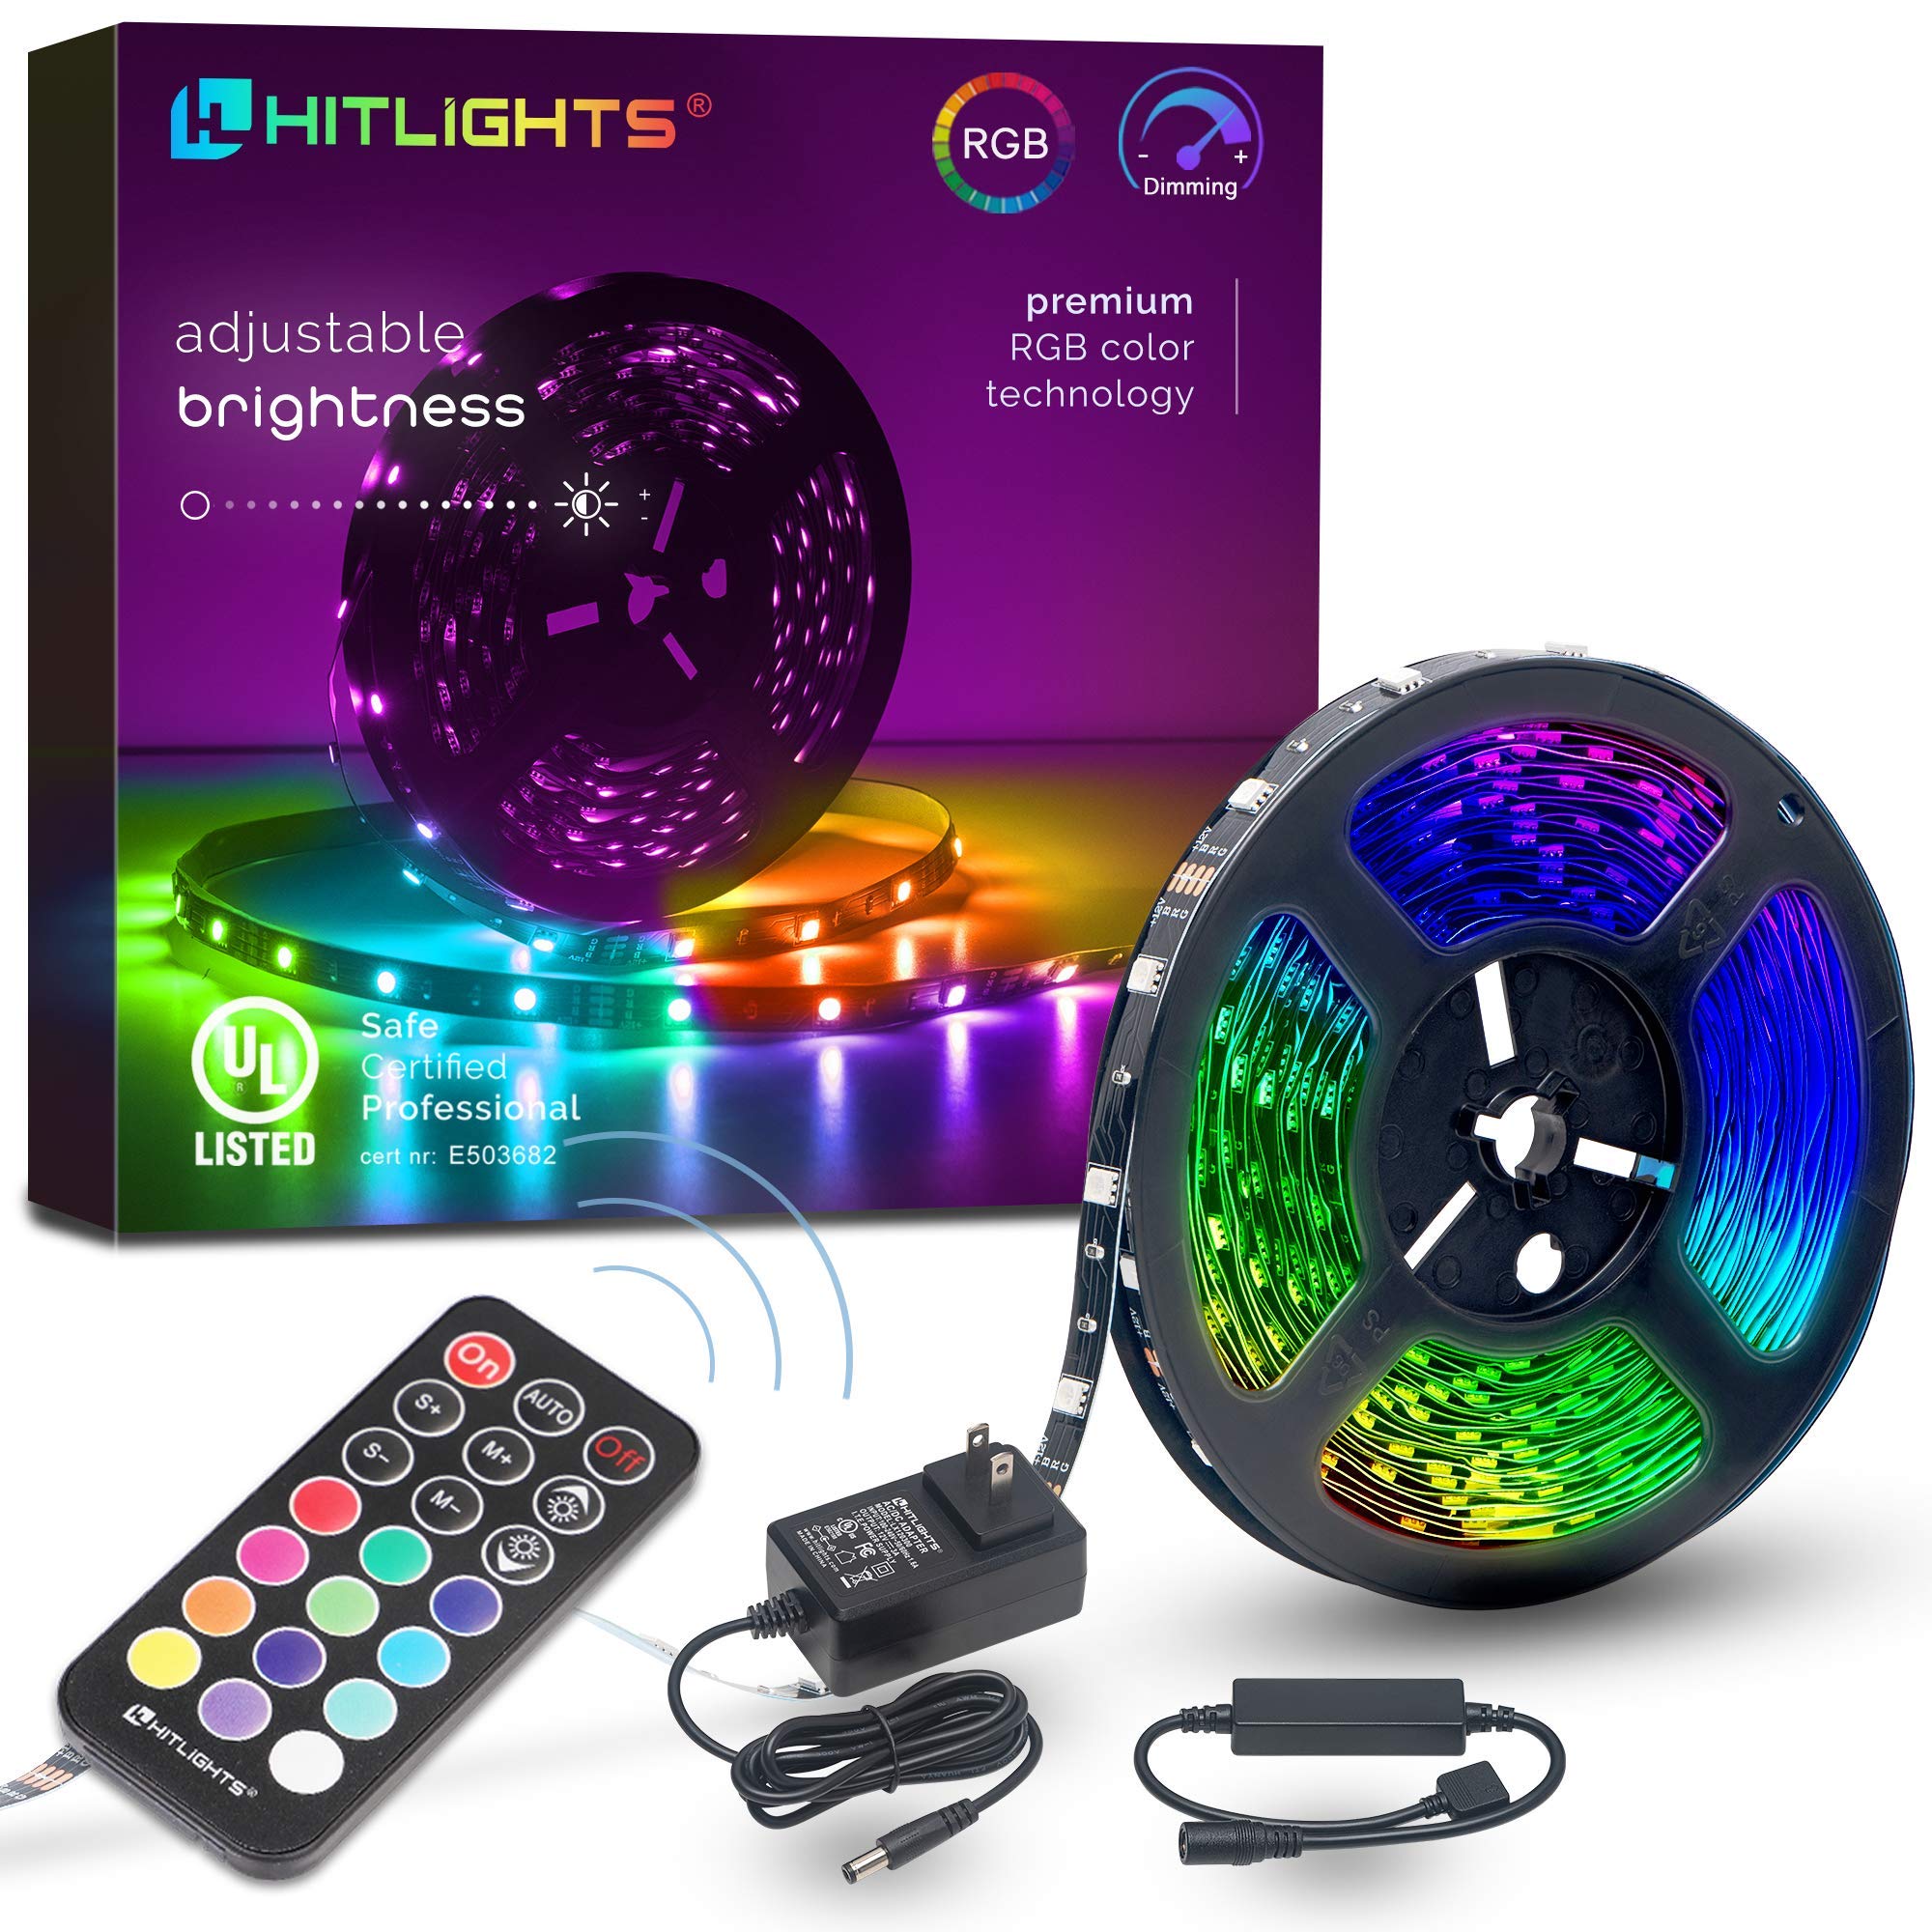 HitLights 32.8ft LED Strip Lights, RGB 5050 Color Changing LED Light Kit Ultra Brighter 300LEDs Flexible Light Strips with RF Remote and UL Power Supply for Home Room Party TV Bedroom